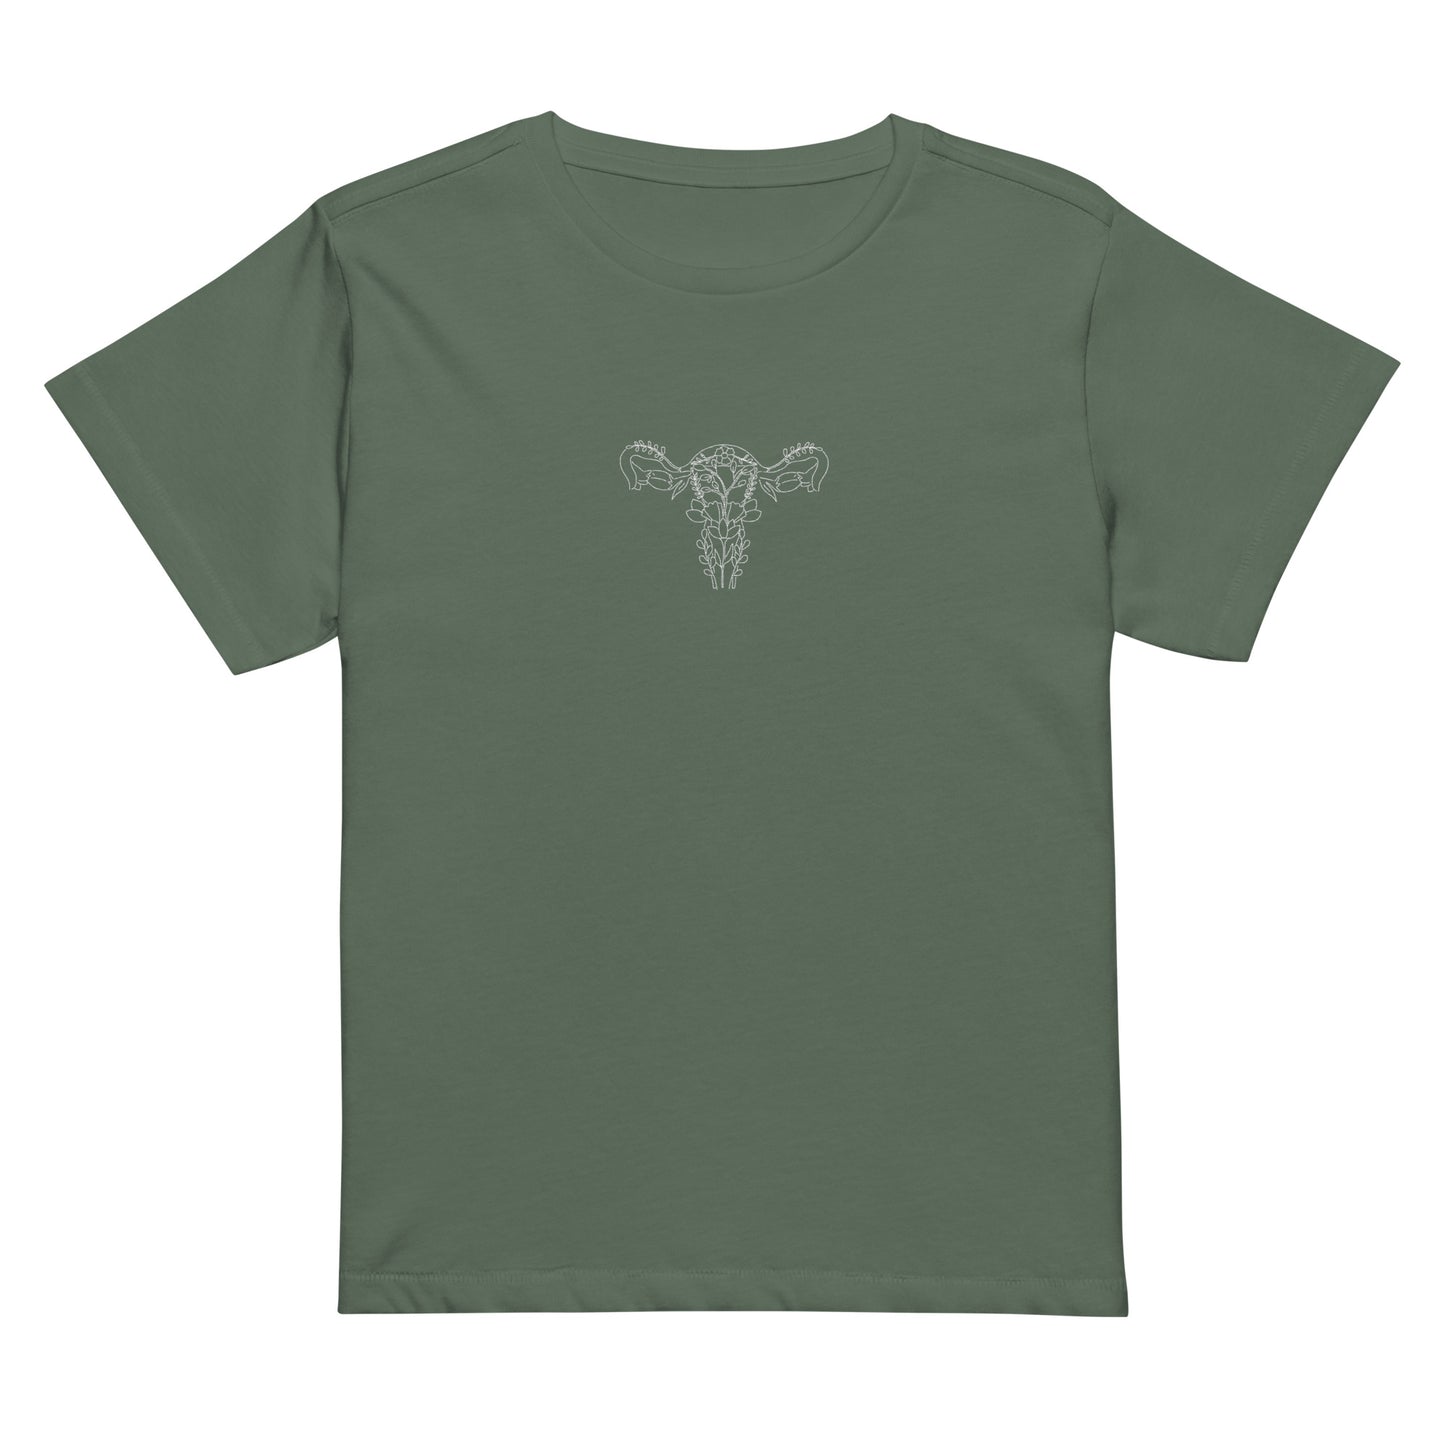 Reproductive Rights Embroidered Tee